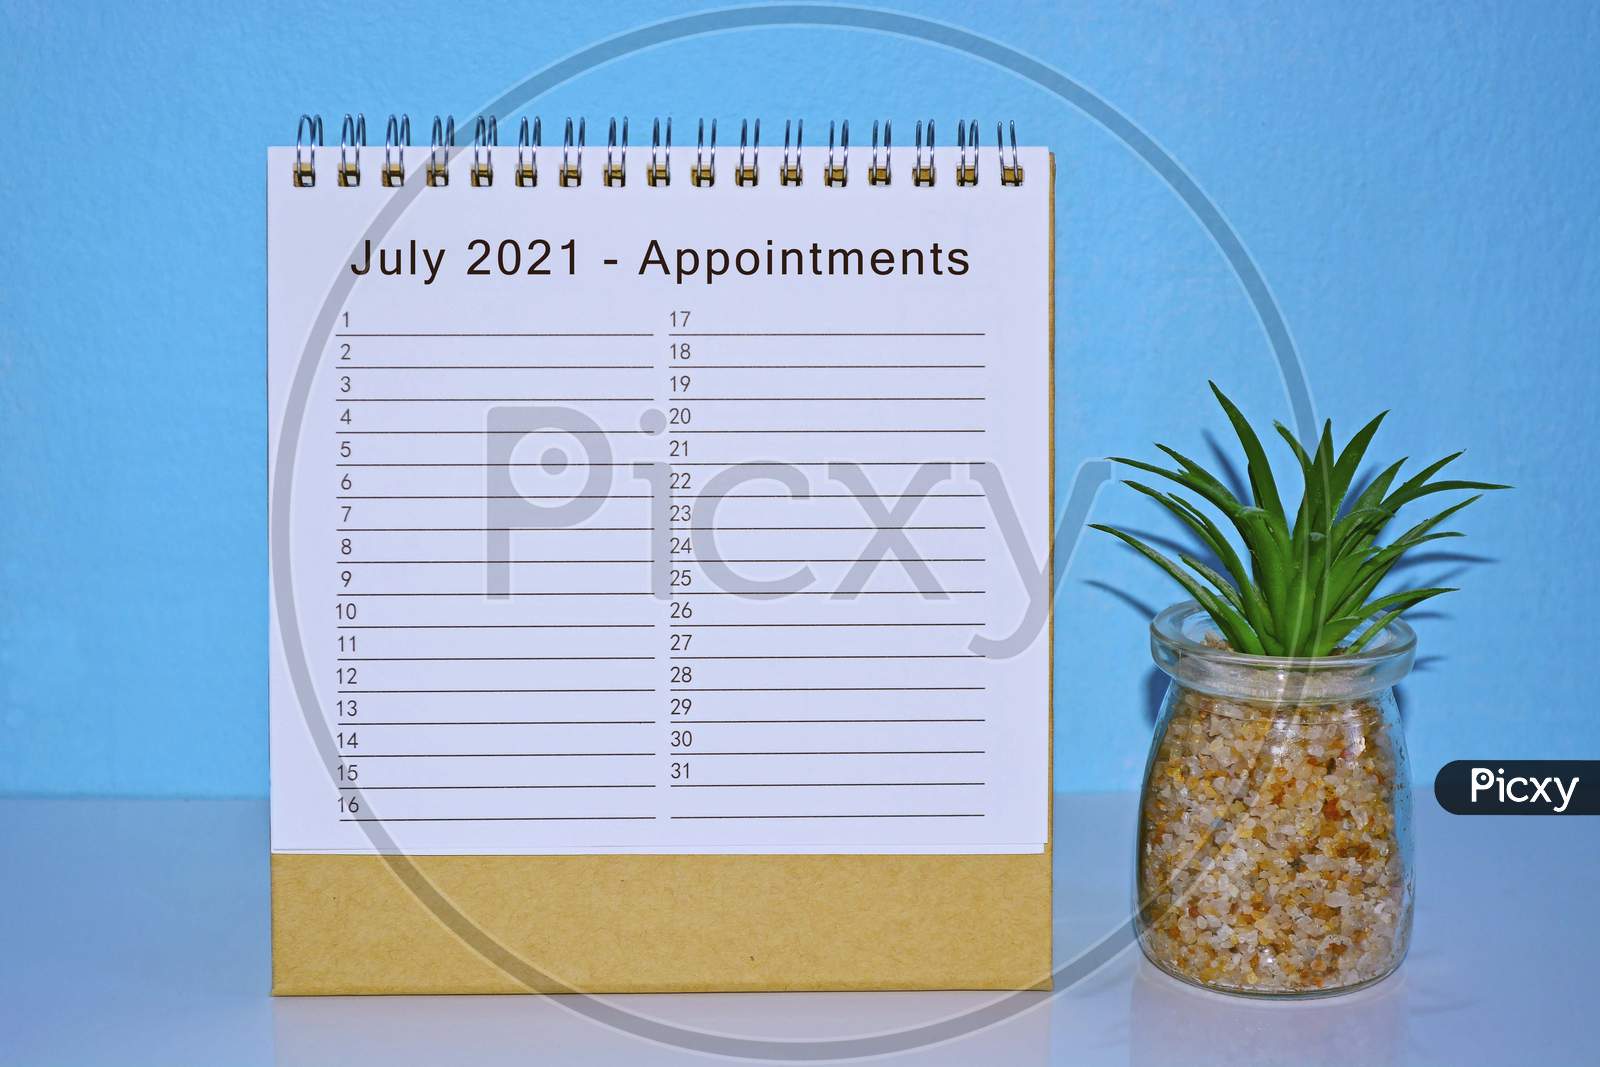 July 2021 Appointment Calendar With Blue Background And Potted Plant